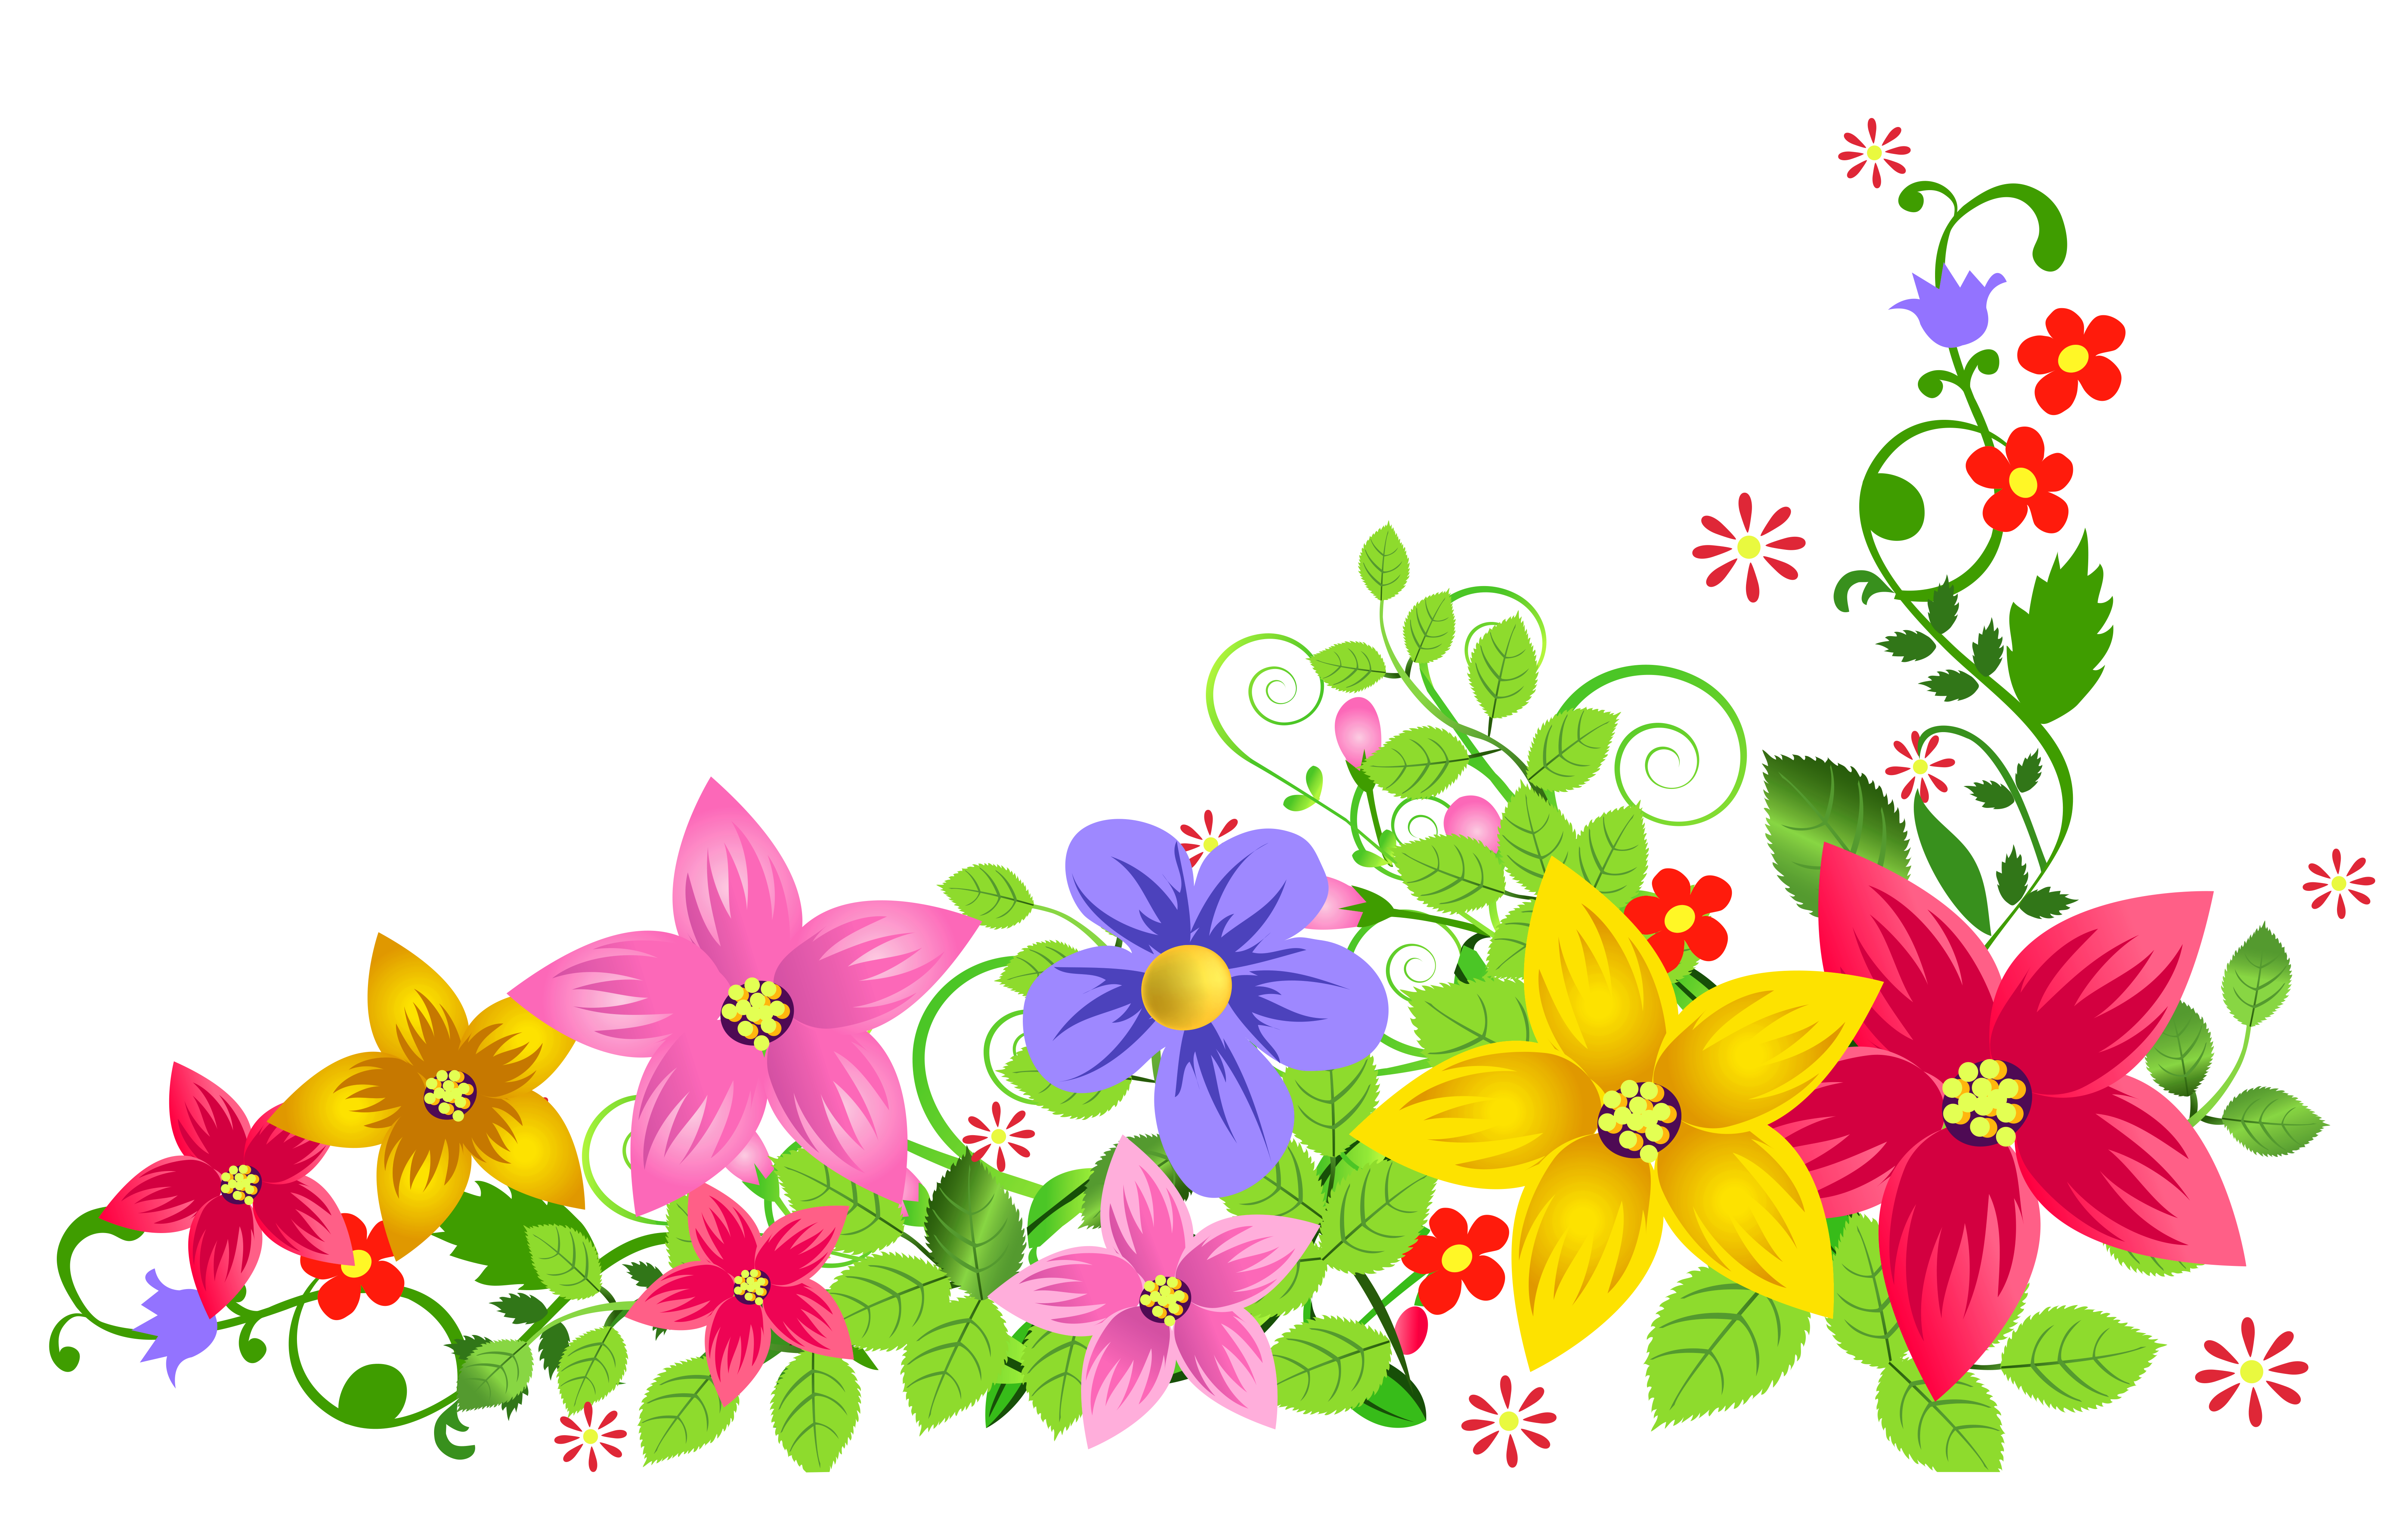 Fresh Flowers Images Hd Png Top Collection Of Different Types Of Flowers In The Images Hd